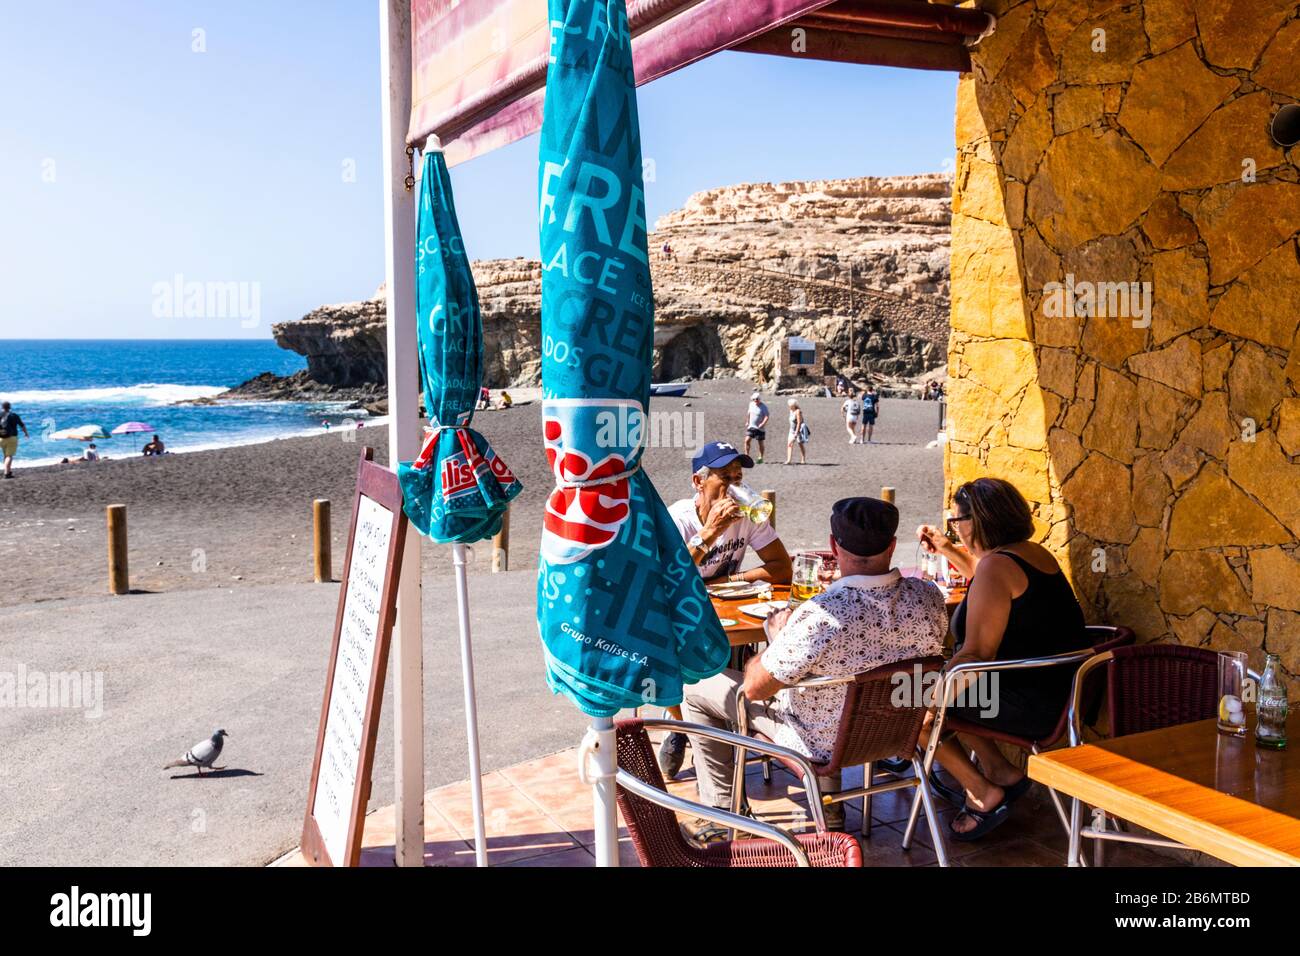 A cafe on the beach at Ajuy on the west coast of the Canary Island of Fuerteventura Stock Photo